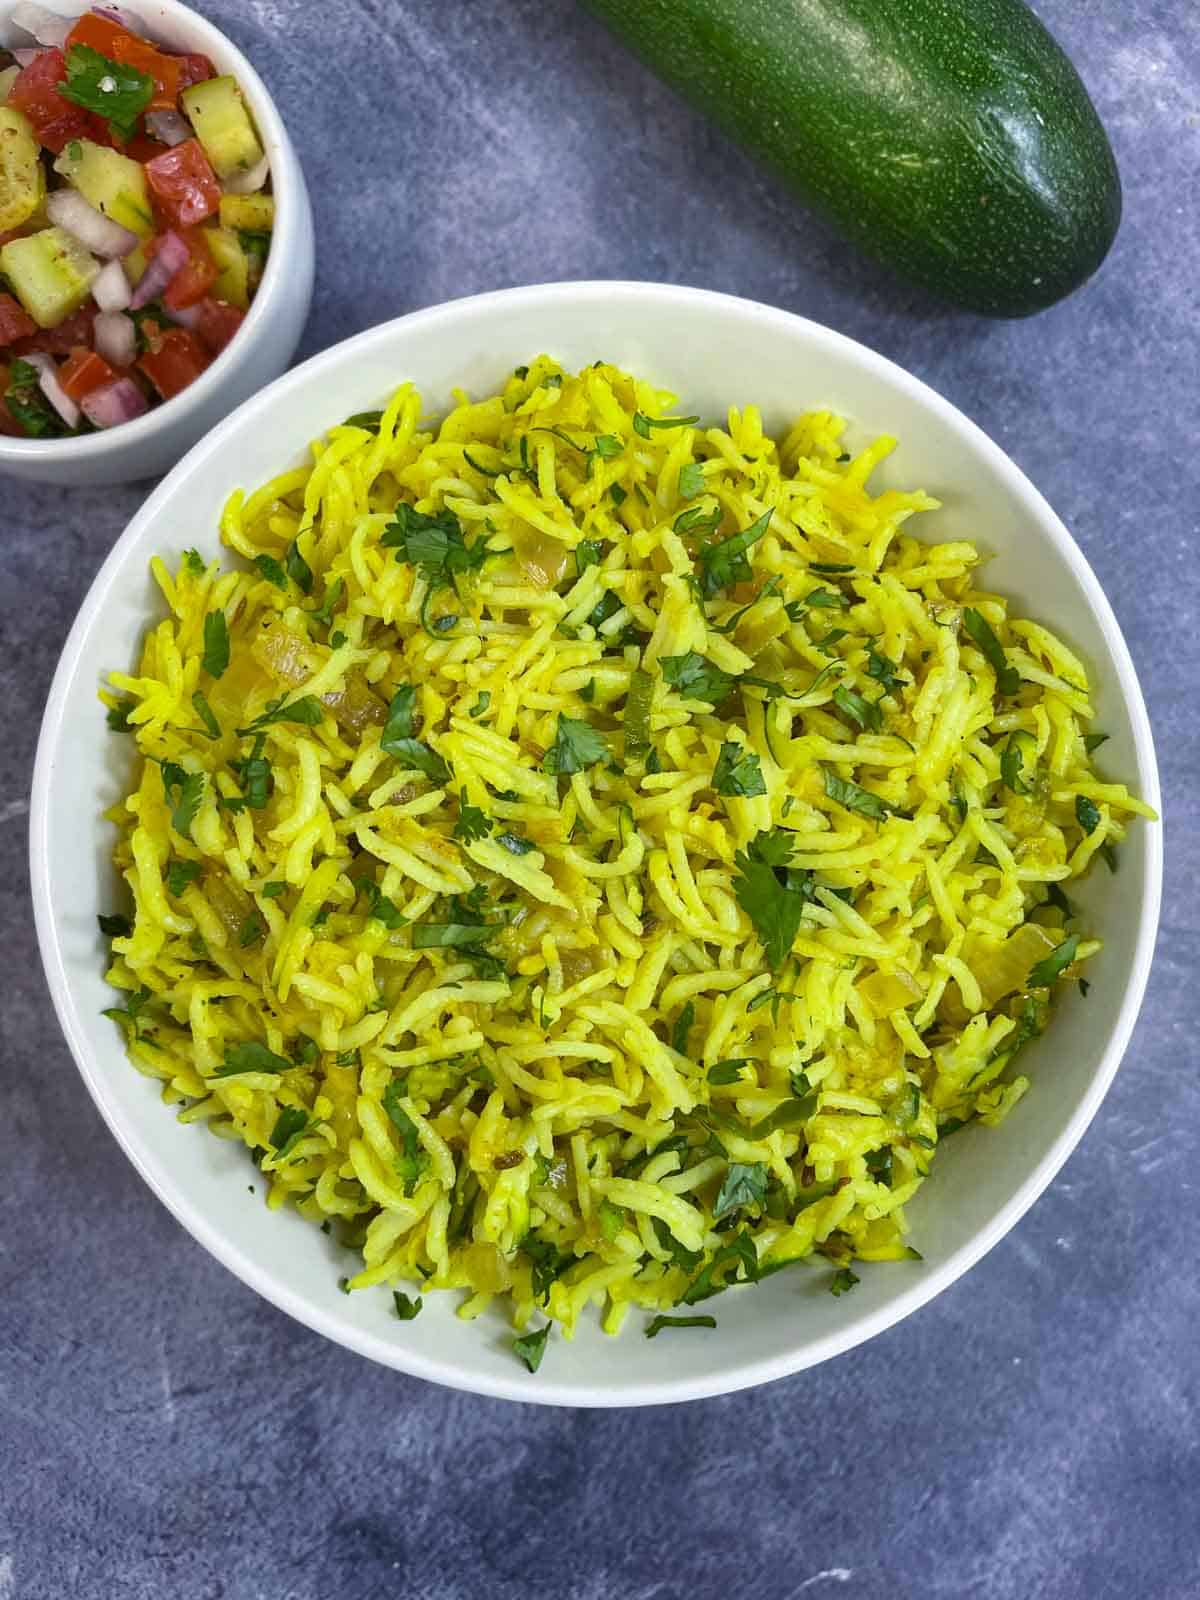 zucchini rice pilaf served in a bowl garnished with coriander leaves with side of salad